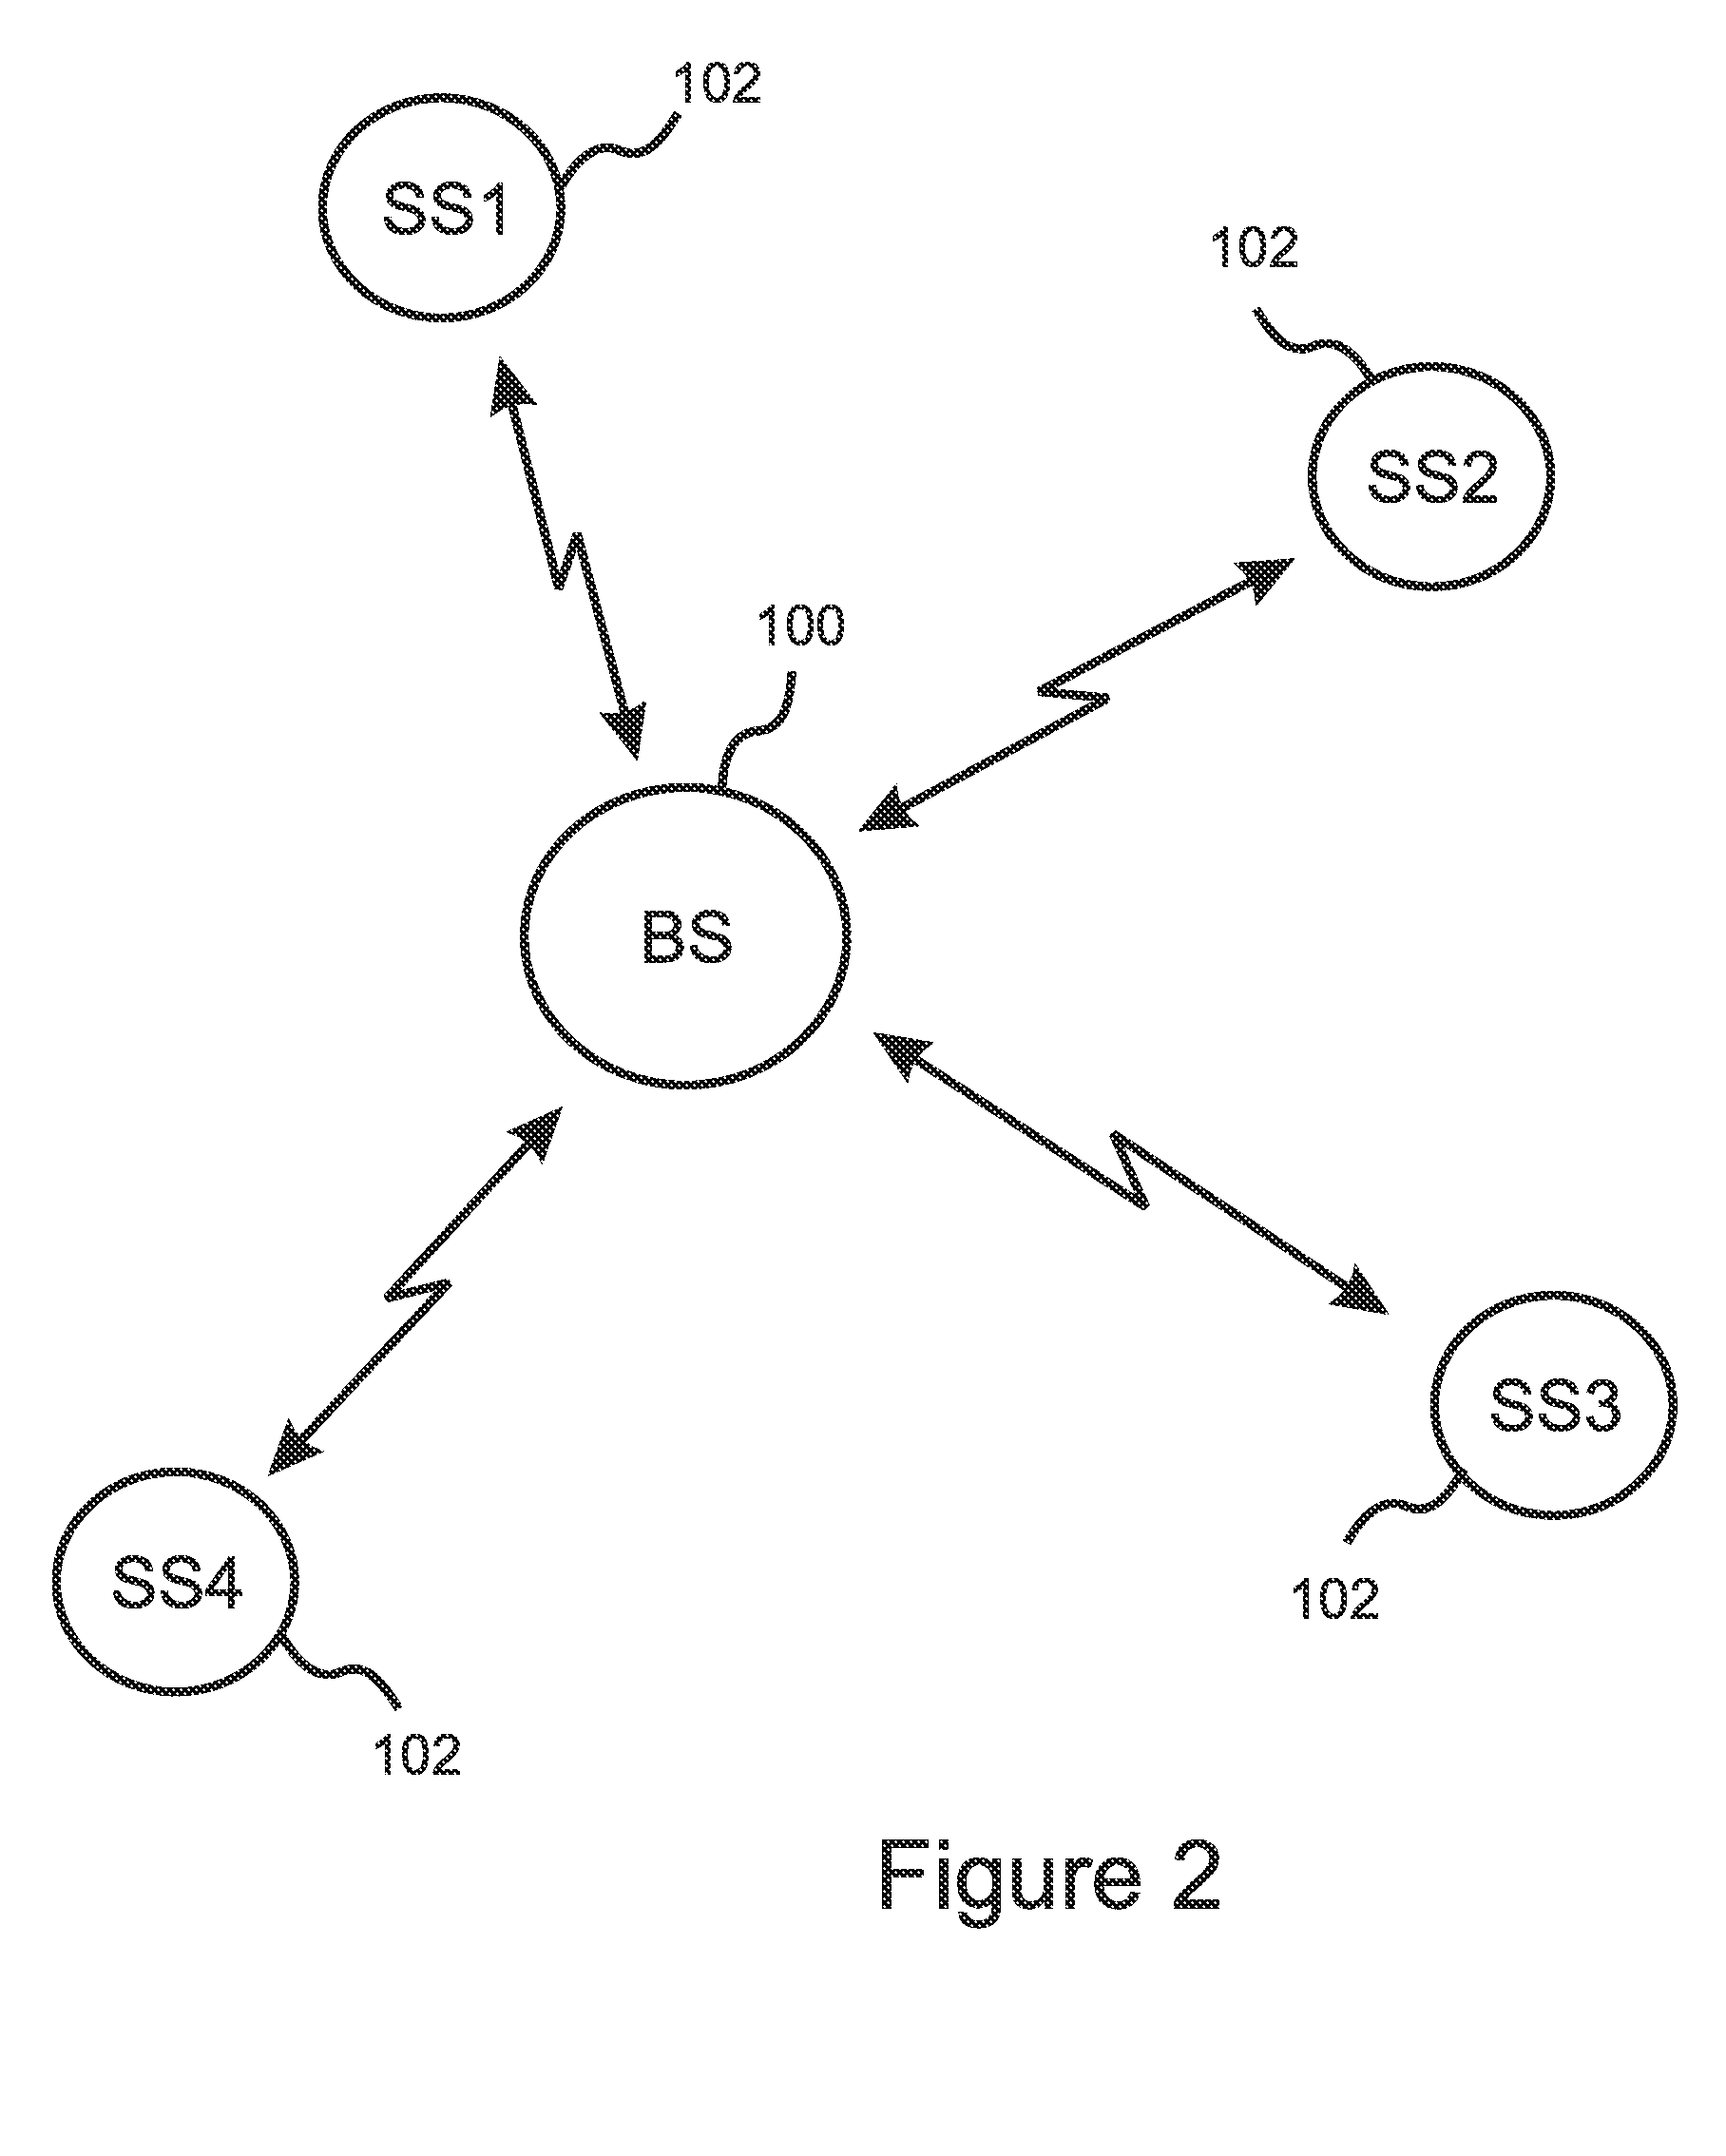 Method for ensuring security and privacy in a wireless cognitive network